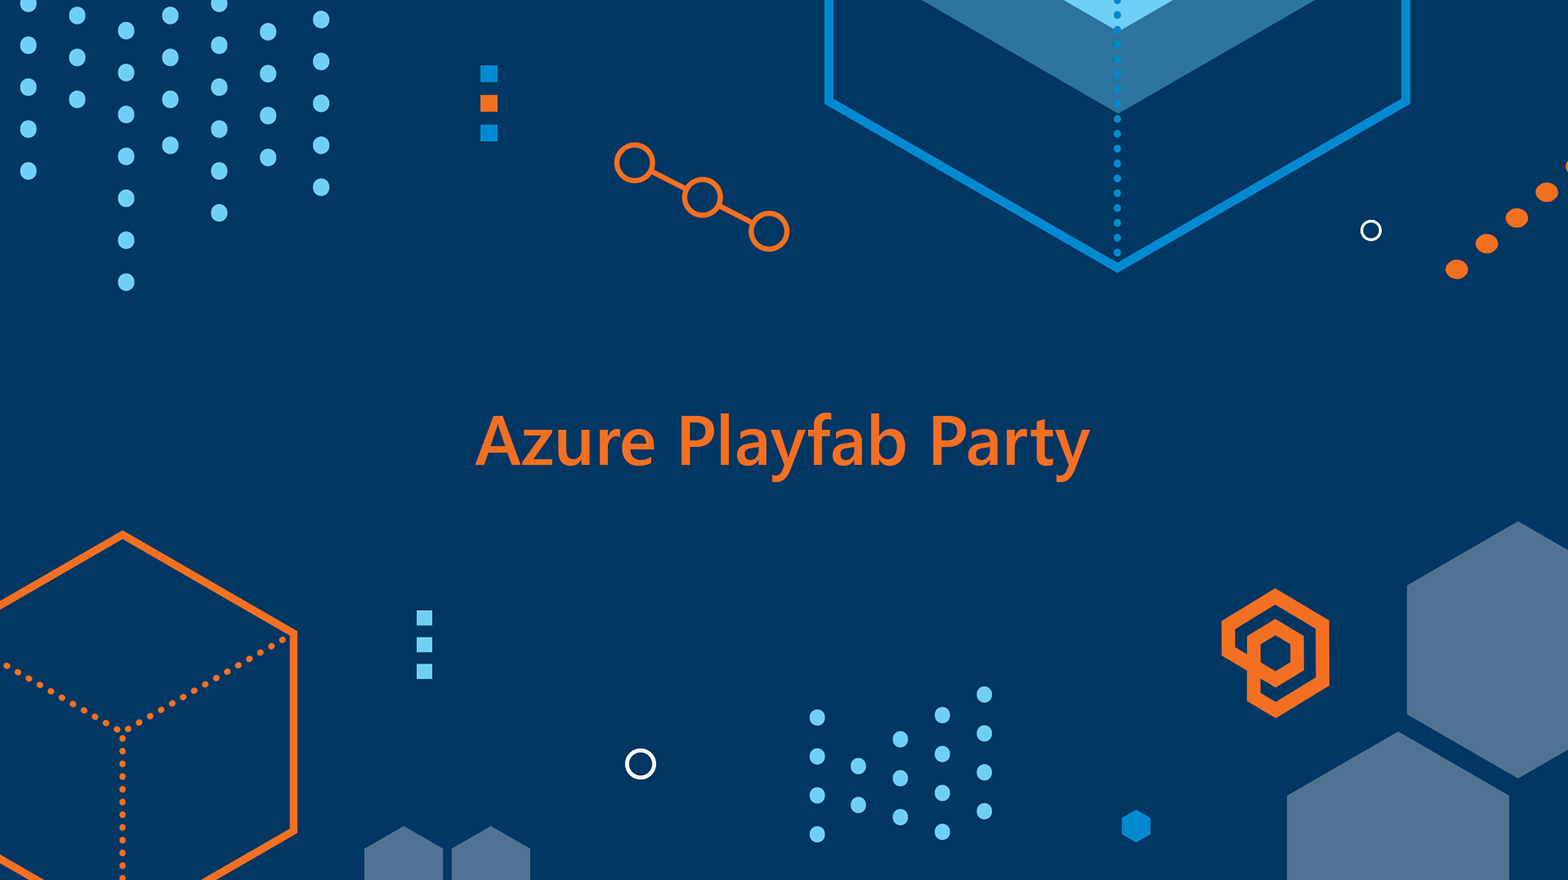 Azure PlayFab Party